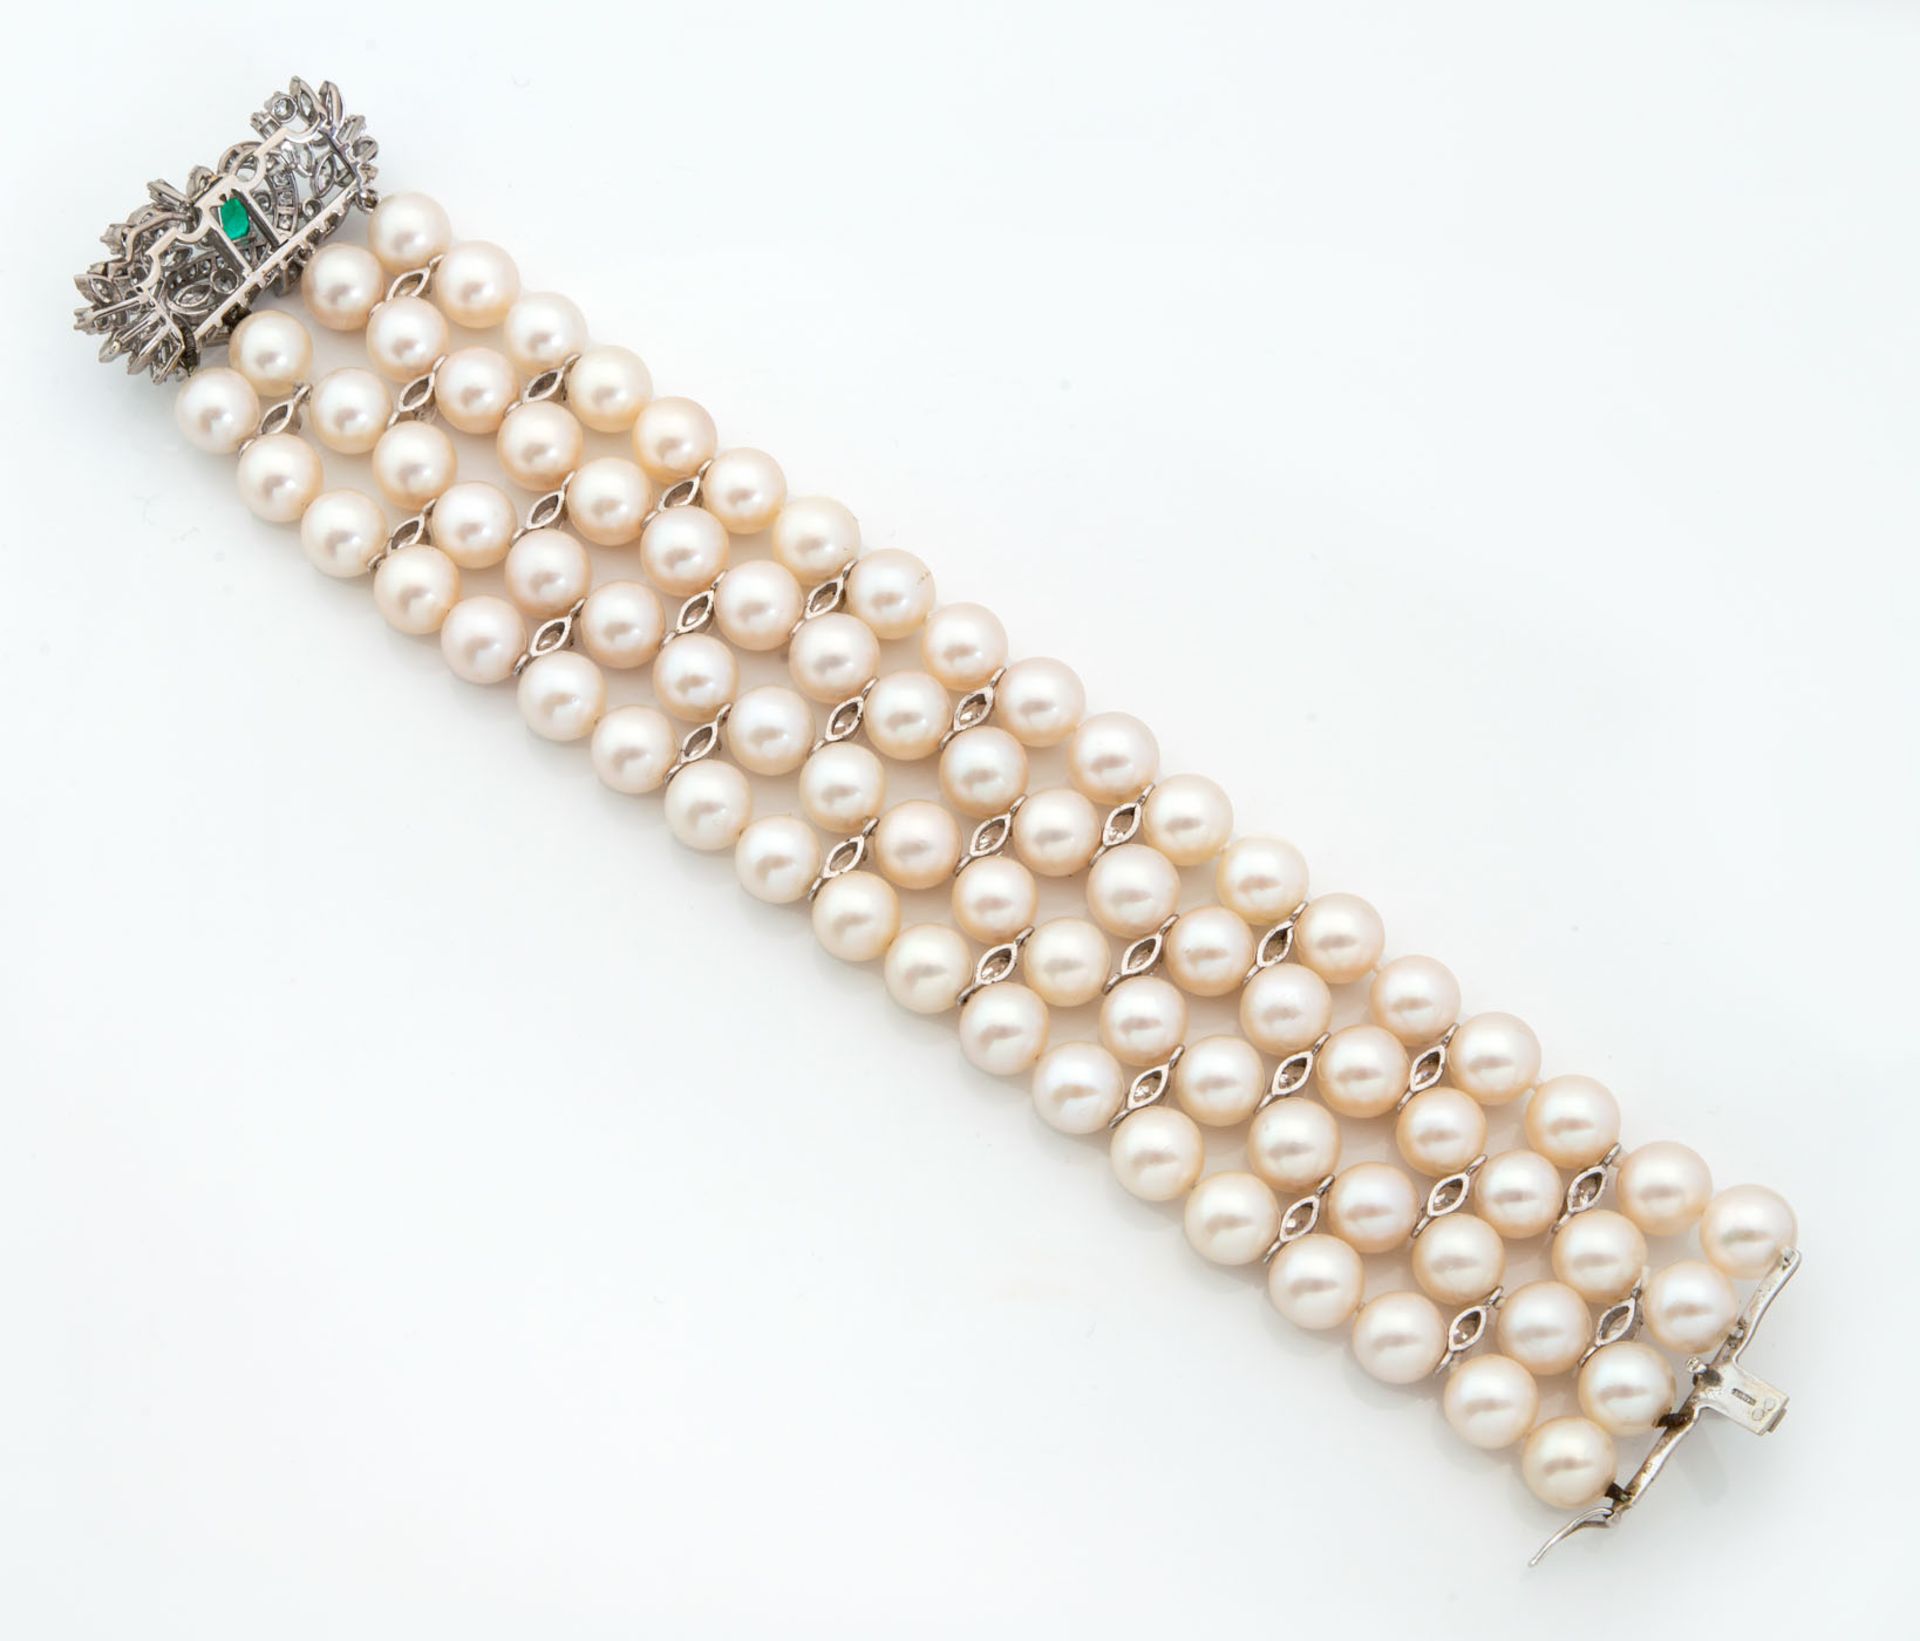 An Exquisite Gold Pearl Diamond and Emerald Bracelet - Image 2 of 3